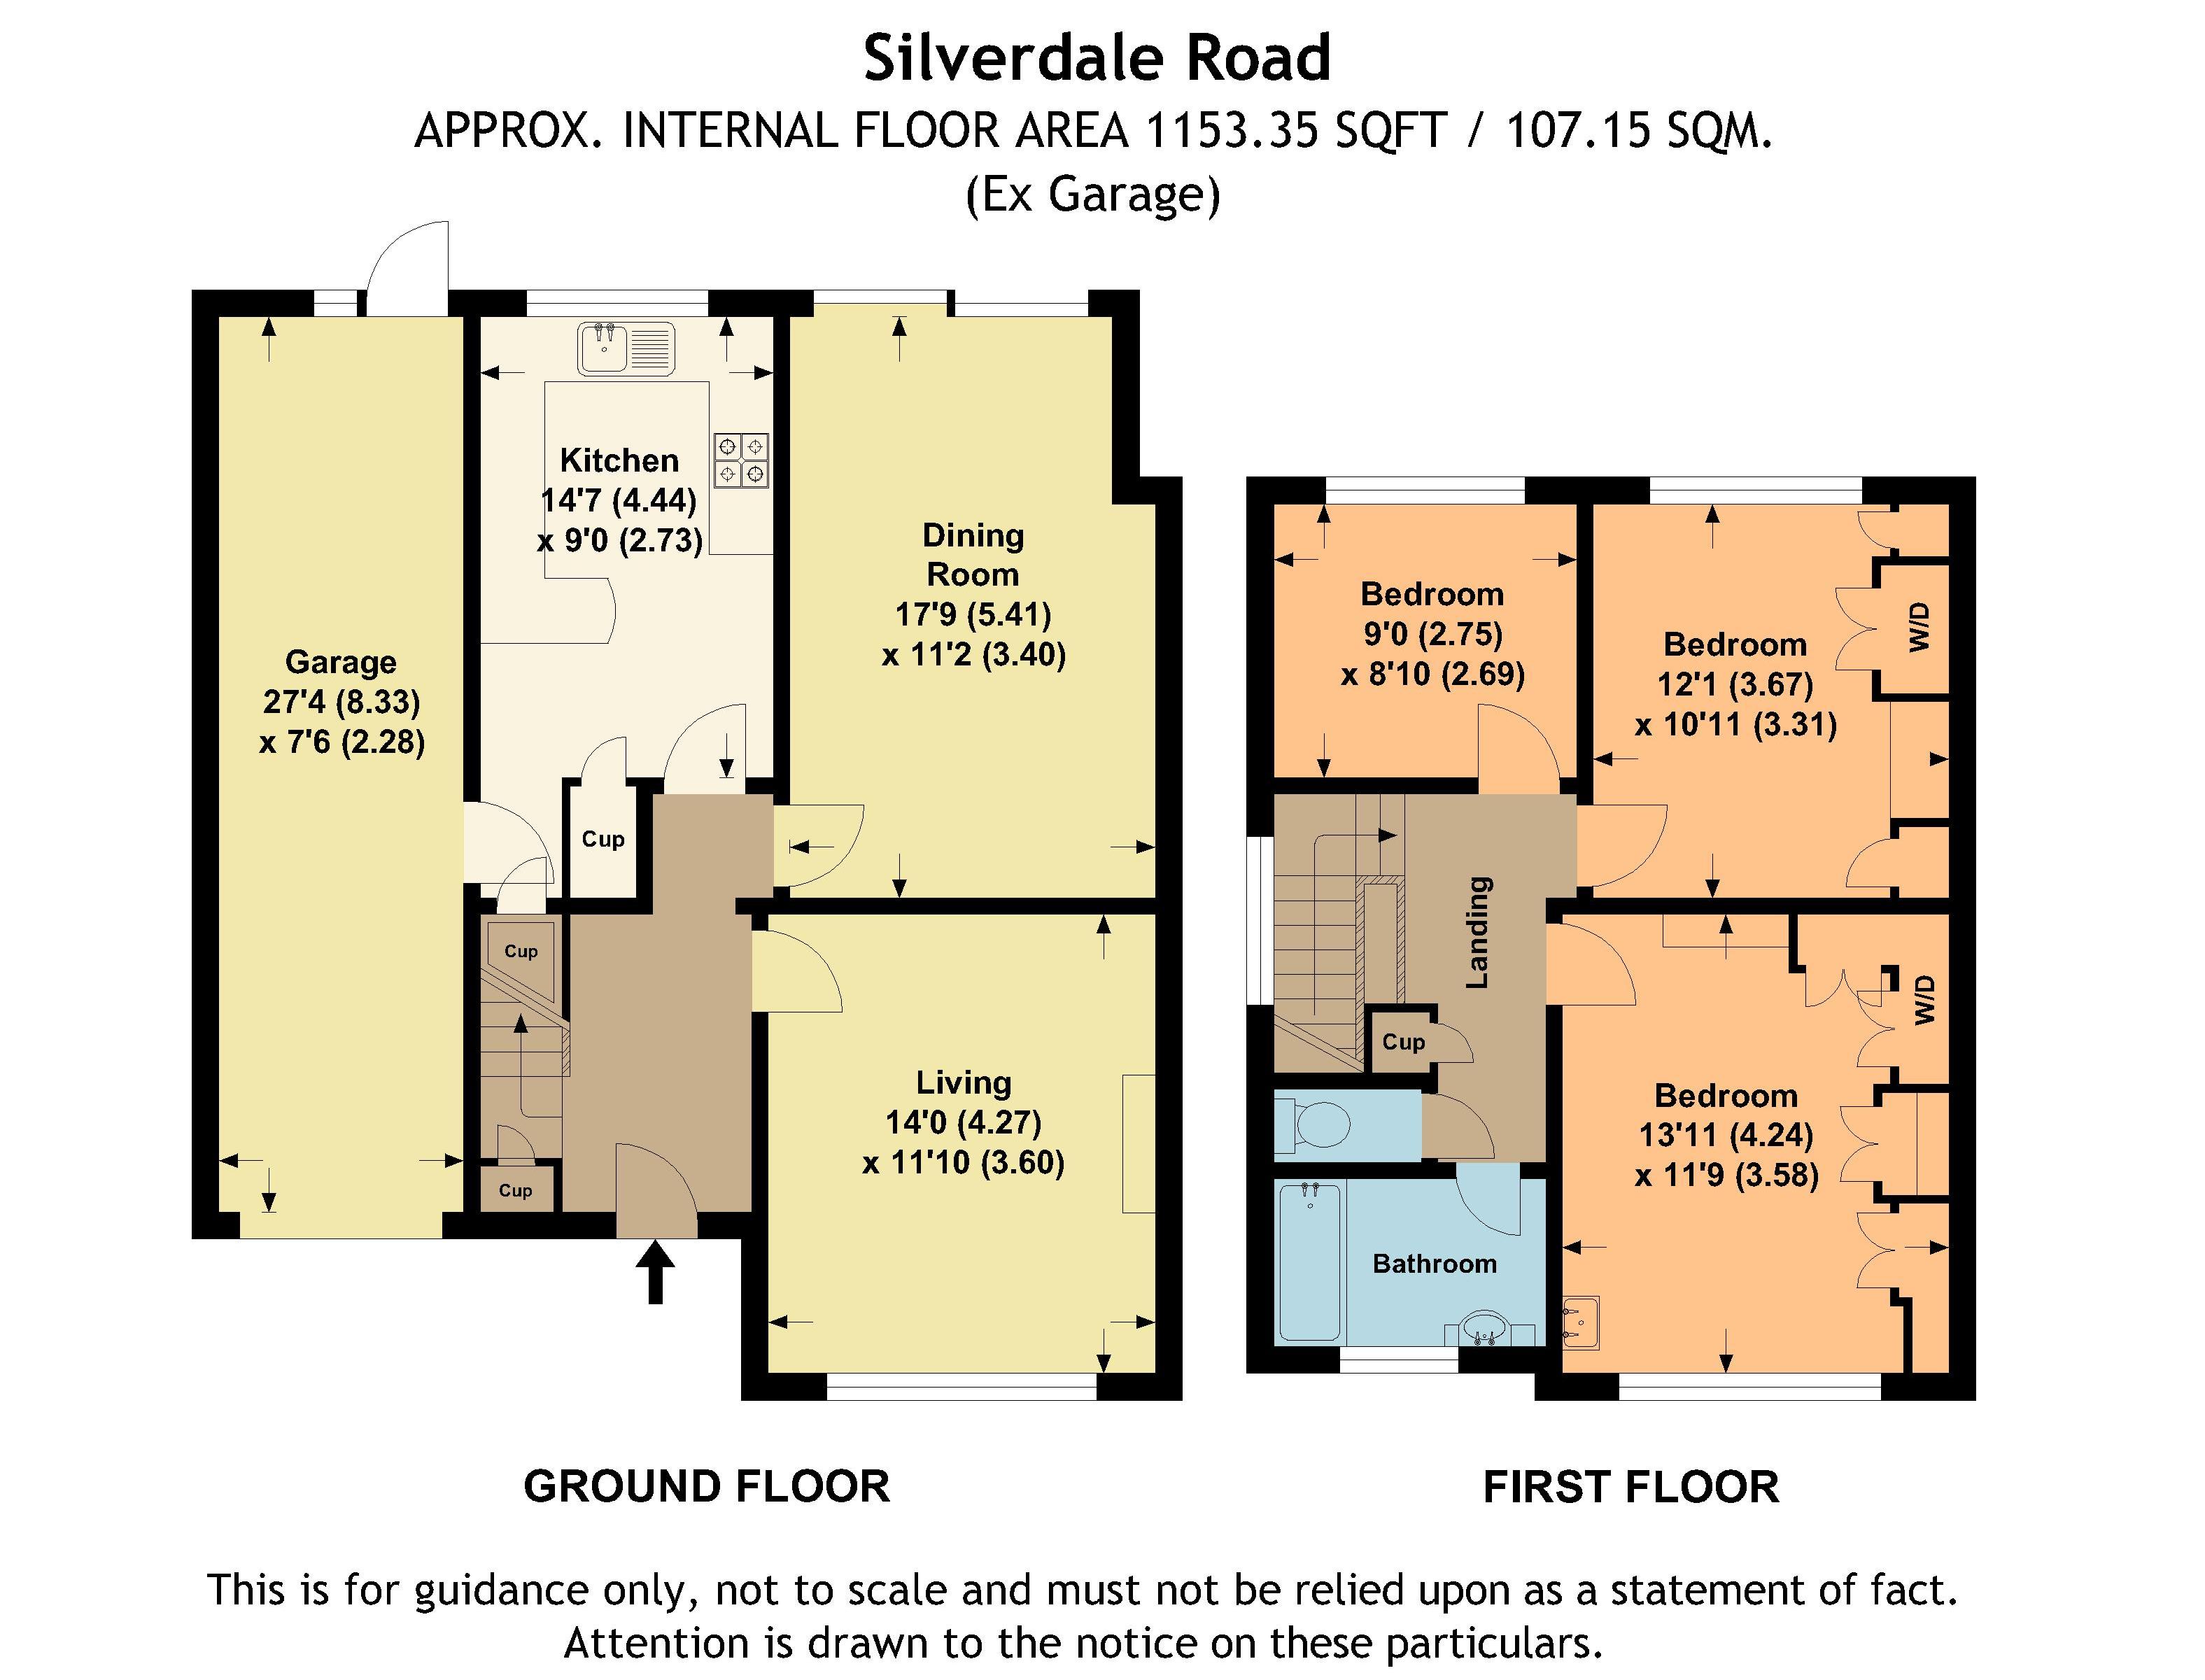 3 Bedrooms Semi-detached house for sale in Silverdale Road, Petts Wood, Orpington BR5